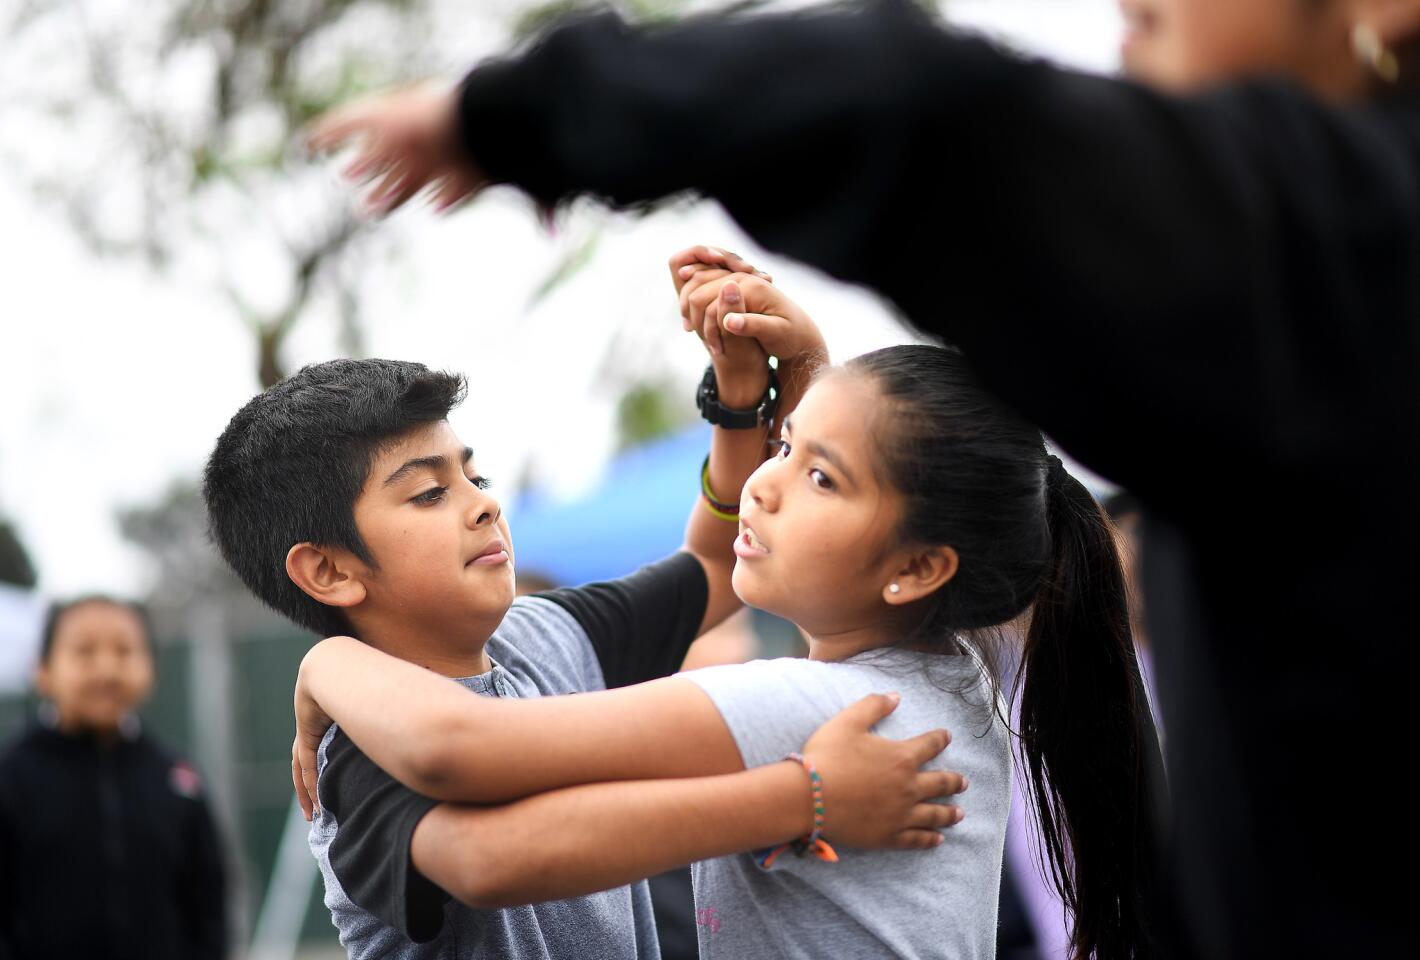 Estrella Elementary School students Eugene Figueroa, left, and Maria Nava practice dancing during their lunch break in Los Angeles on Monday, May 22, 2018.